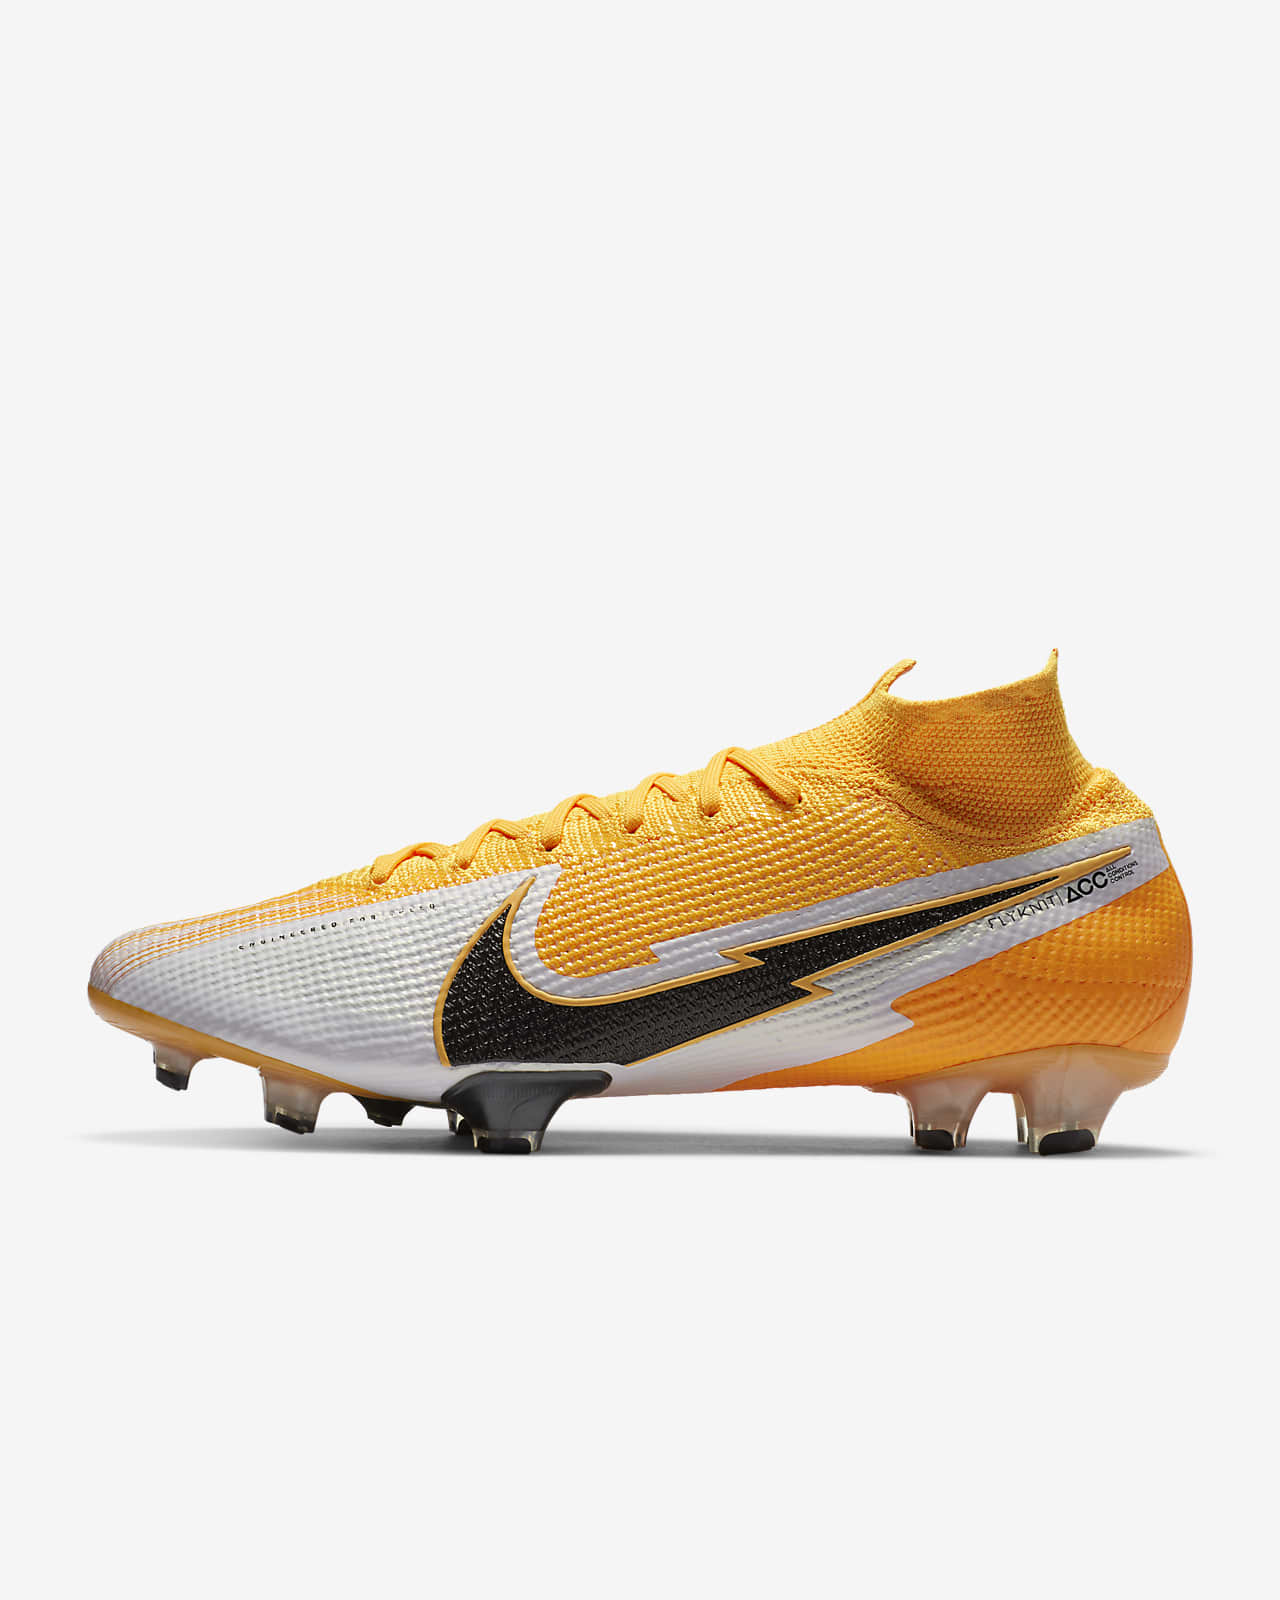 Elite FG Firm-Ground Soccer Cleat. Nike JP